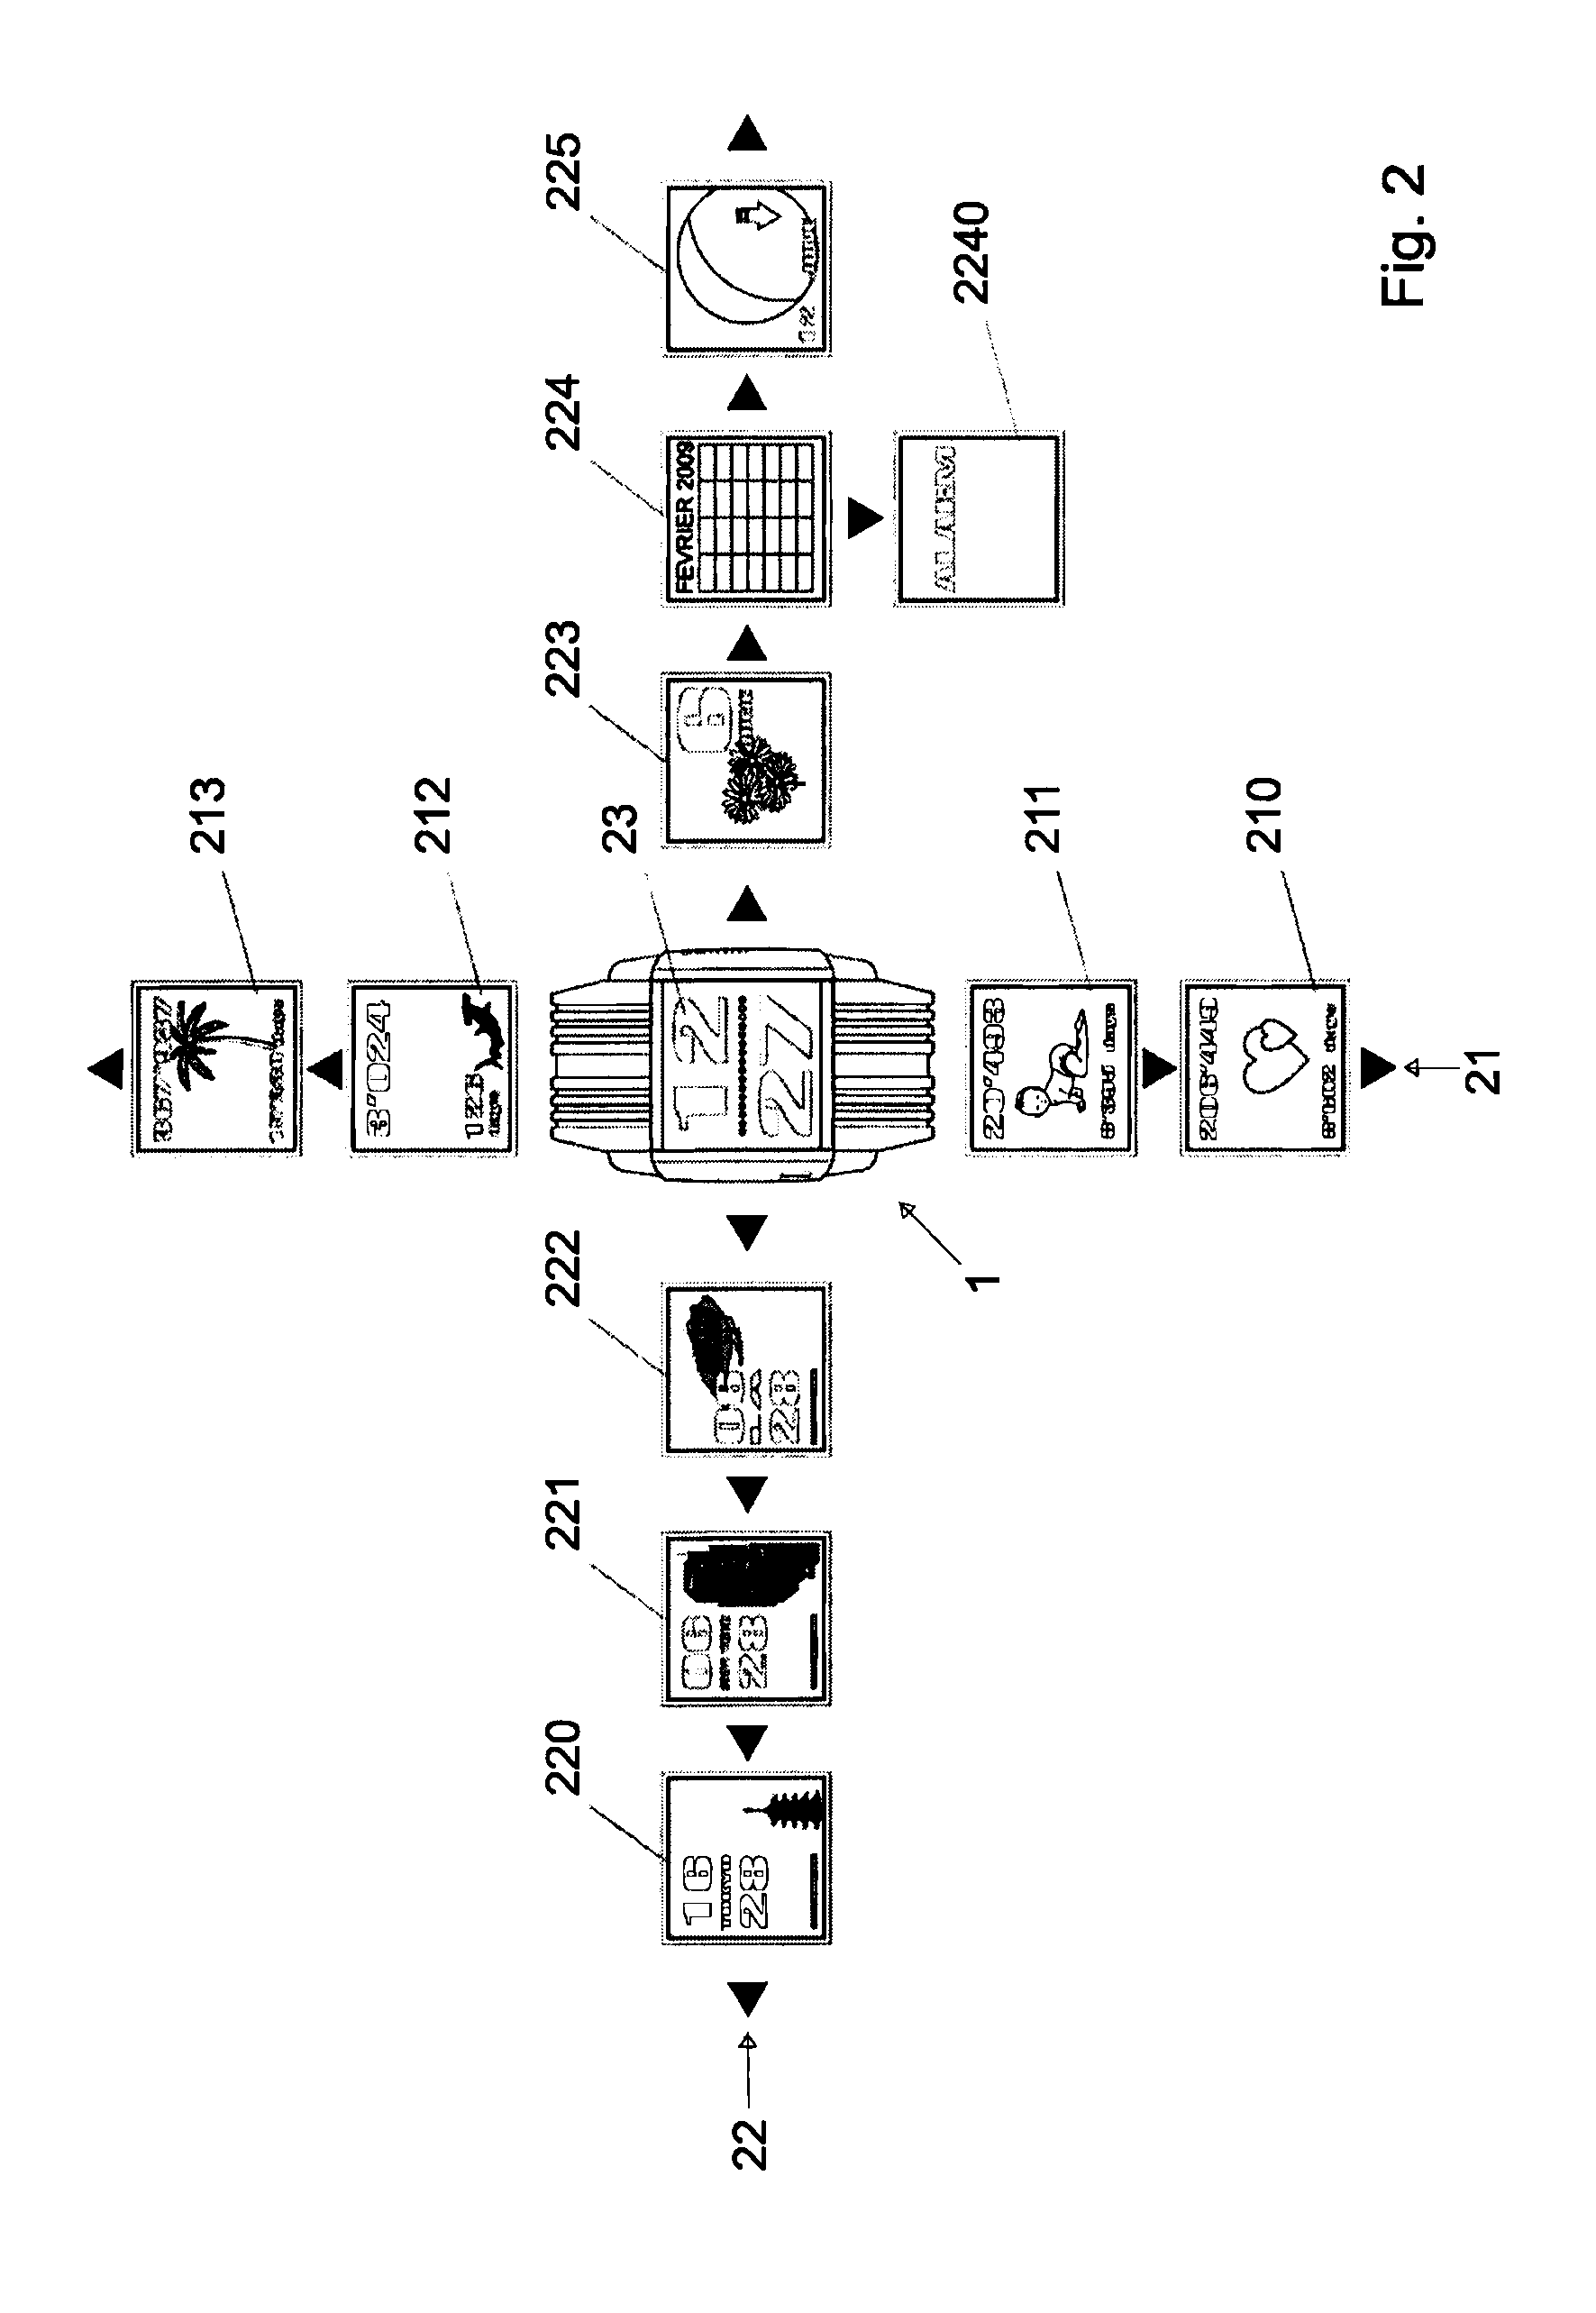 Wristwatch with a touch screen and method for displaying on a touch-screen watch